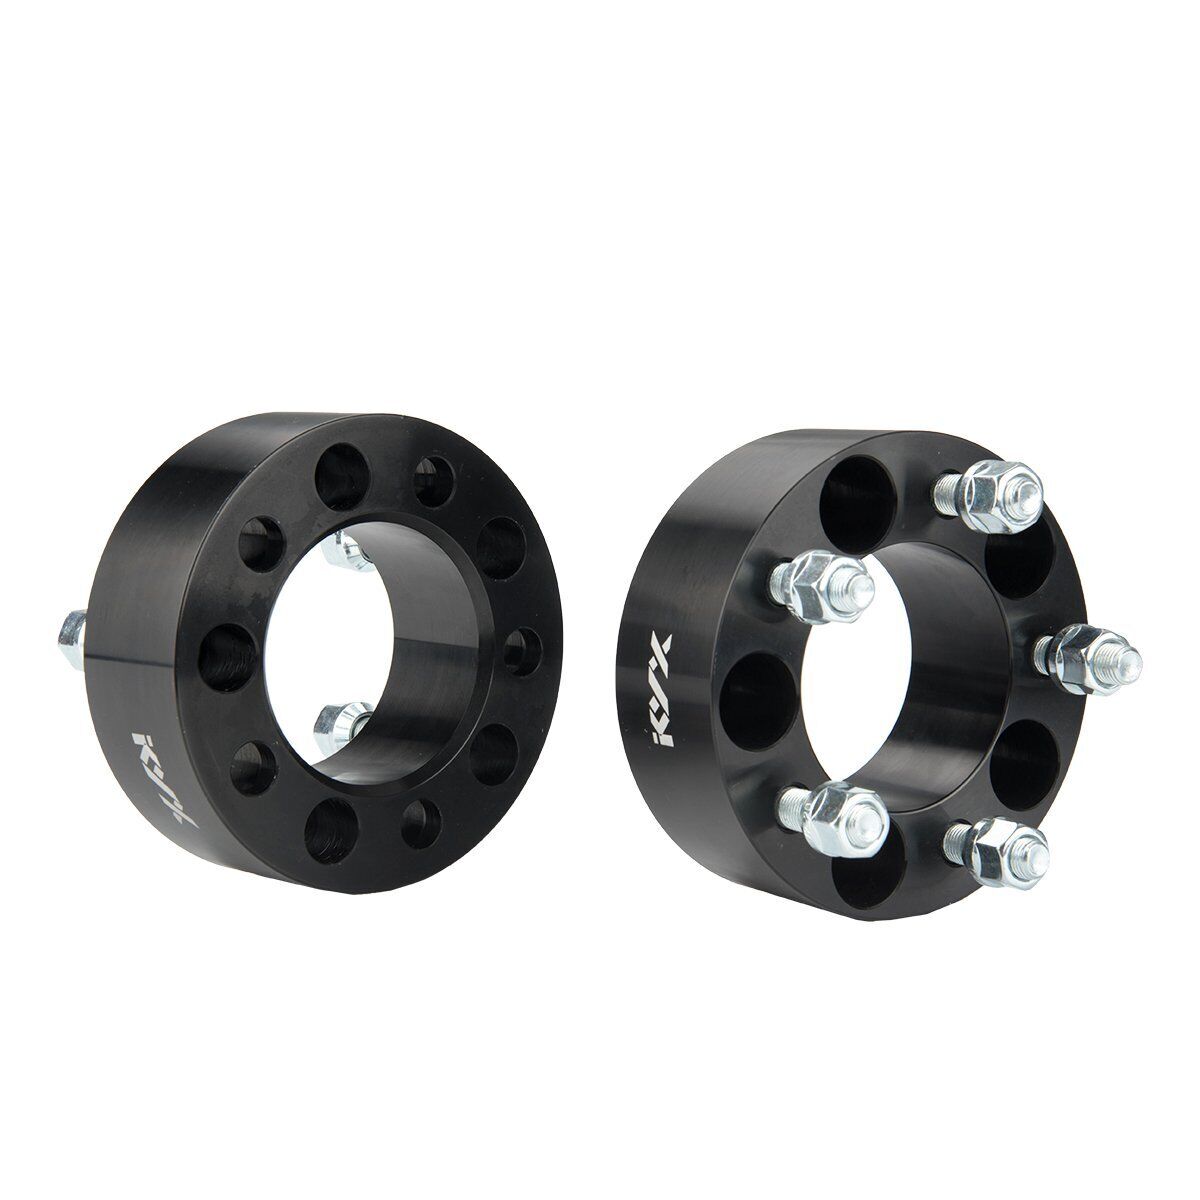 2\'\'thick/50mm-5x114.3mm-1/2x20-82.5 BLack Wheel Spacers for Ford Aerostar 2pc